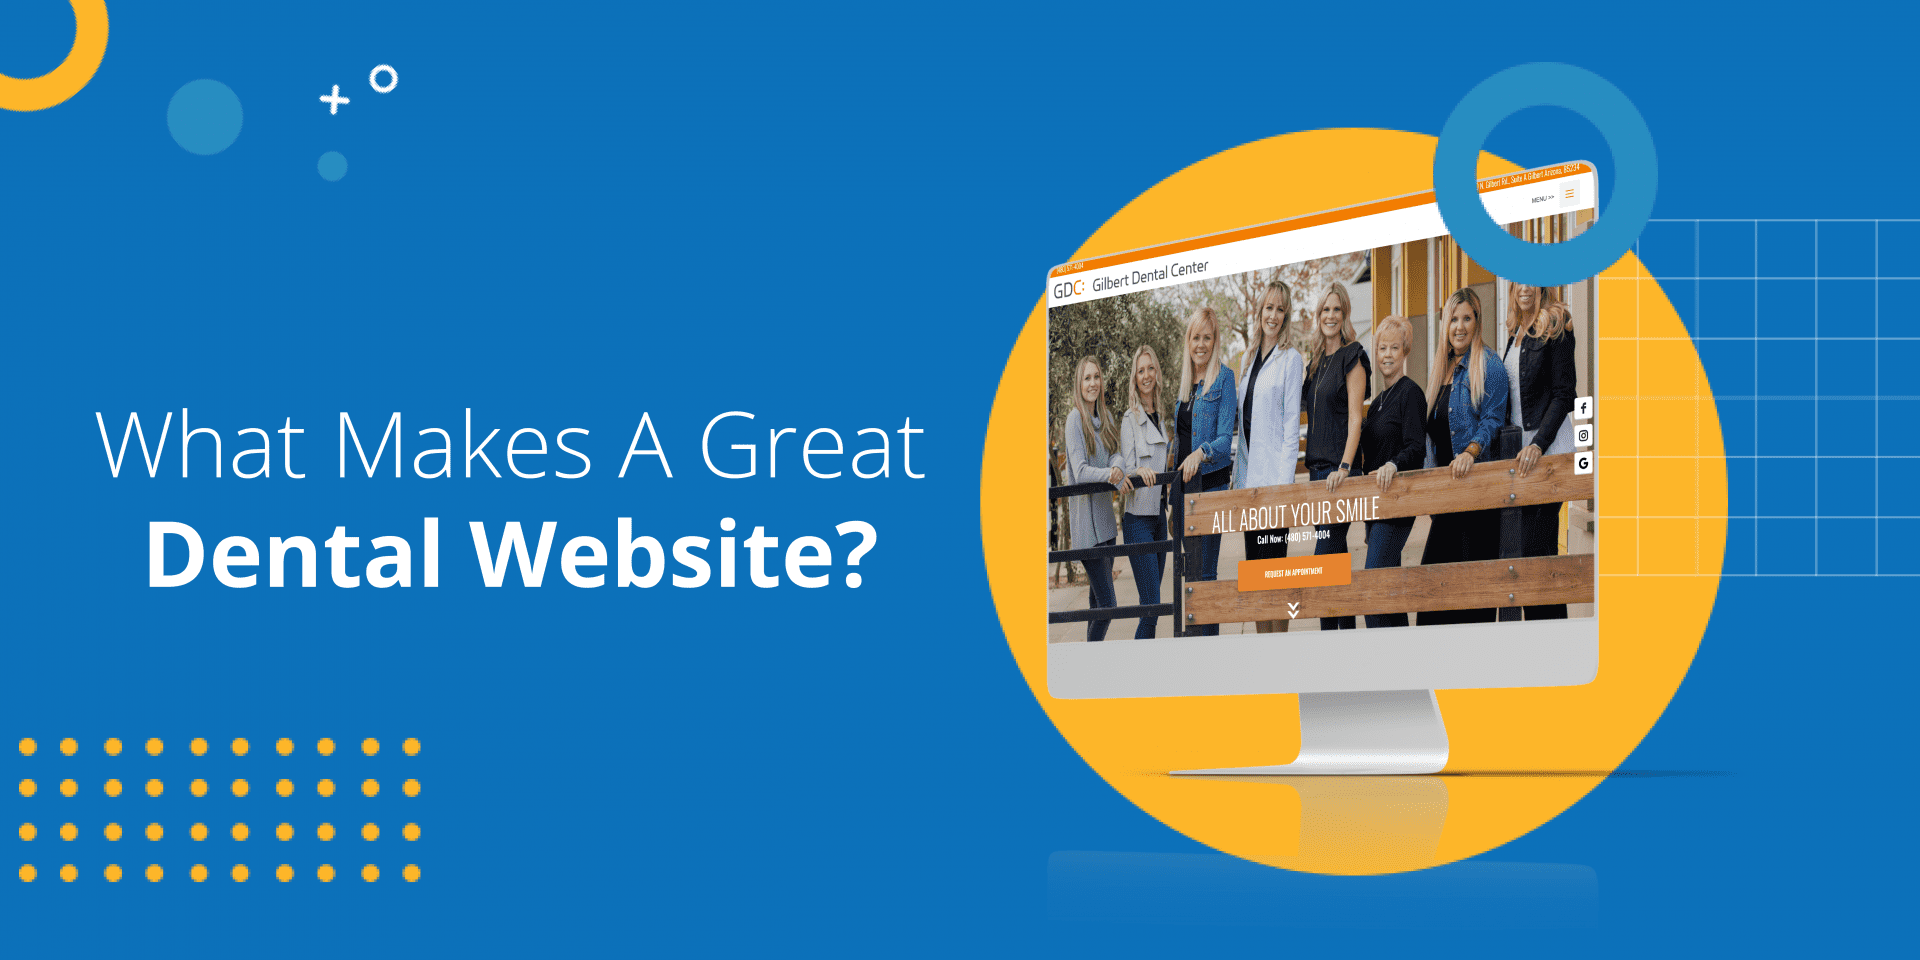 what makes a great dental website?